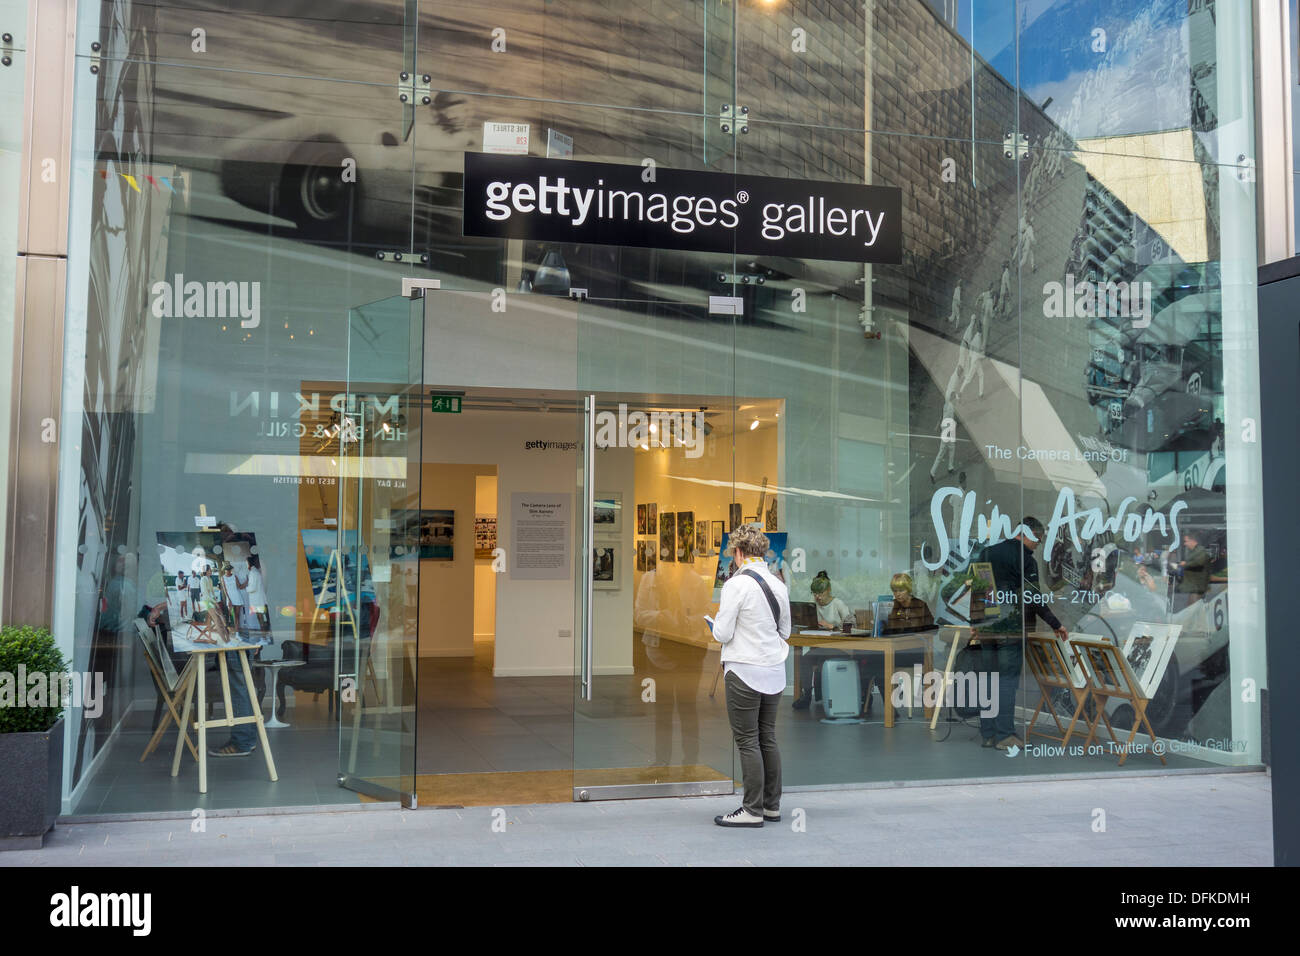 Getty Images Gallery il centro commerciale Westfield Stratford City Foto Stock